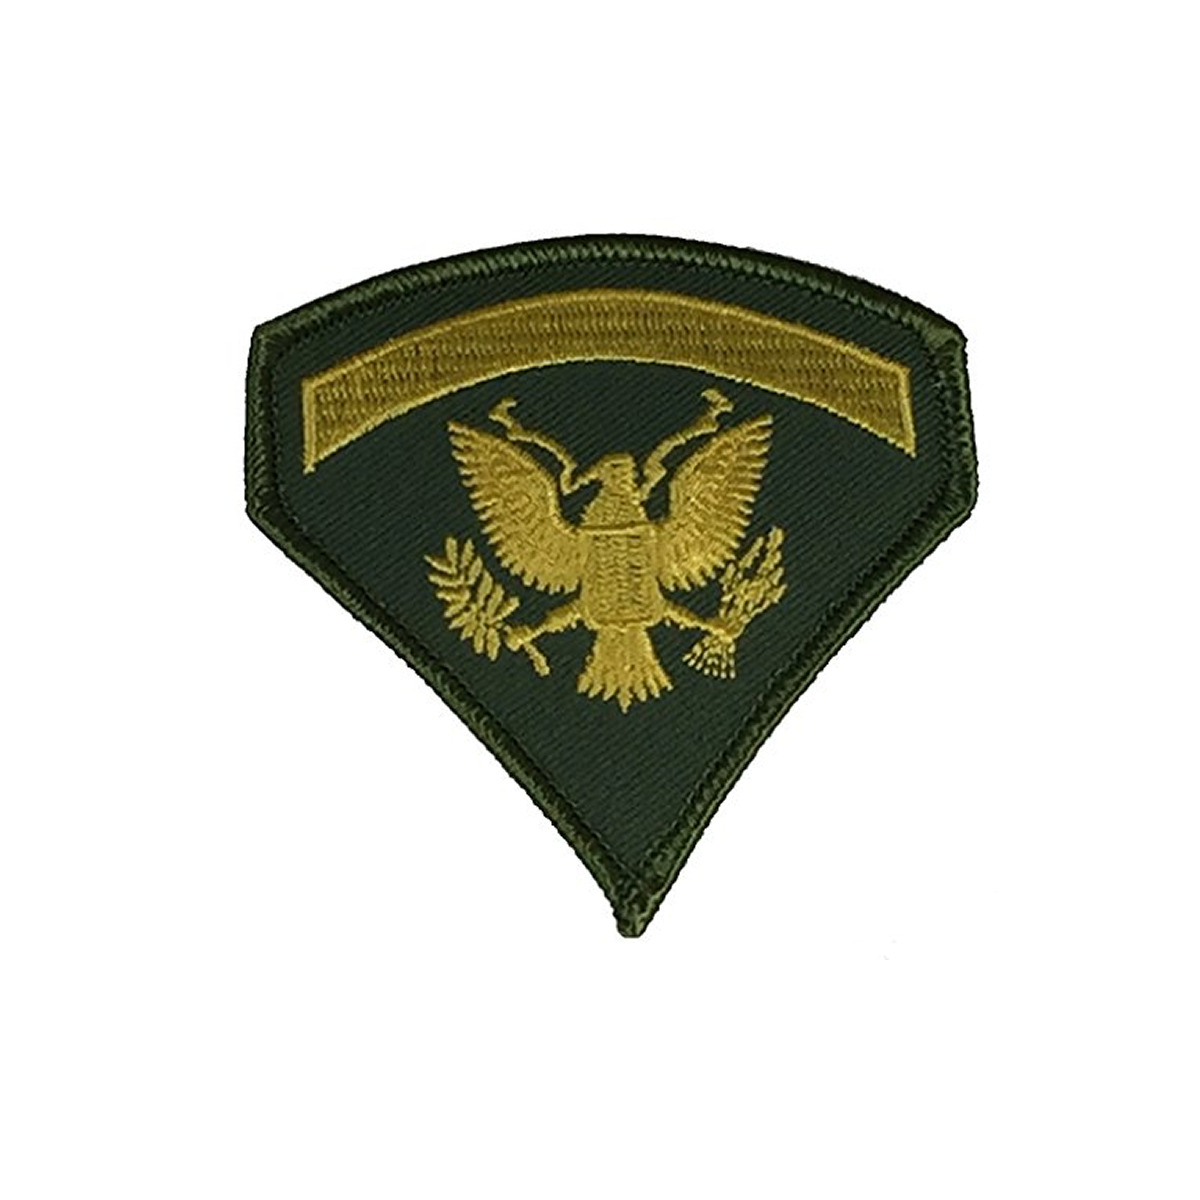 U.S. ARMY SPECIALIST E-5 SPEC-5 RANK TAB PATCH - COLOR - Veteran Owned Business